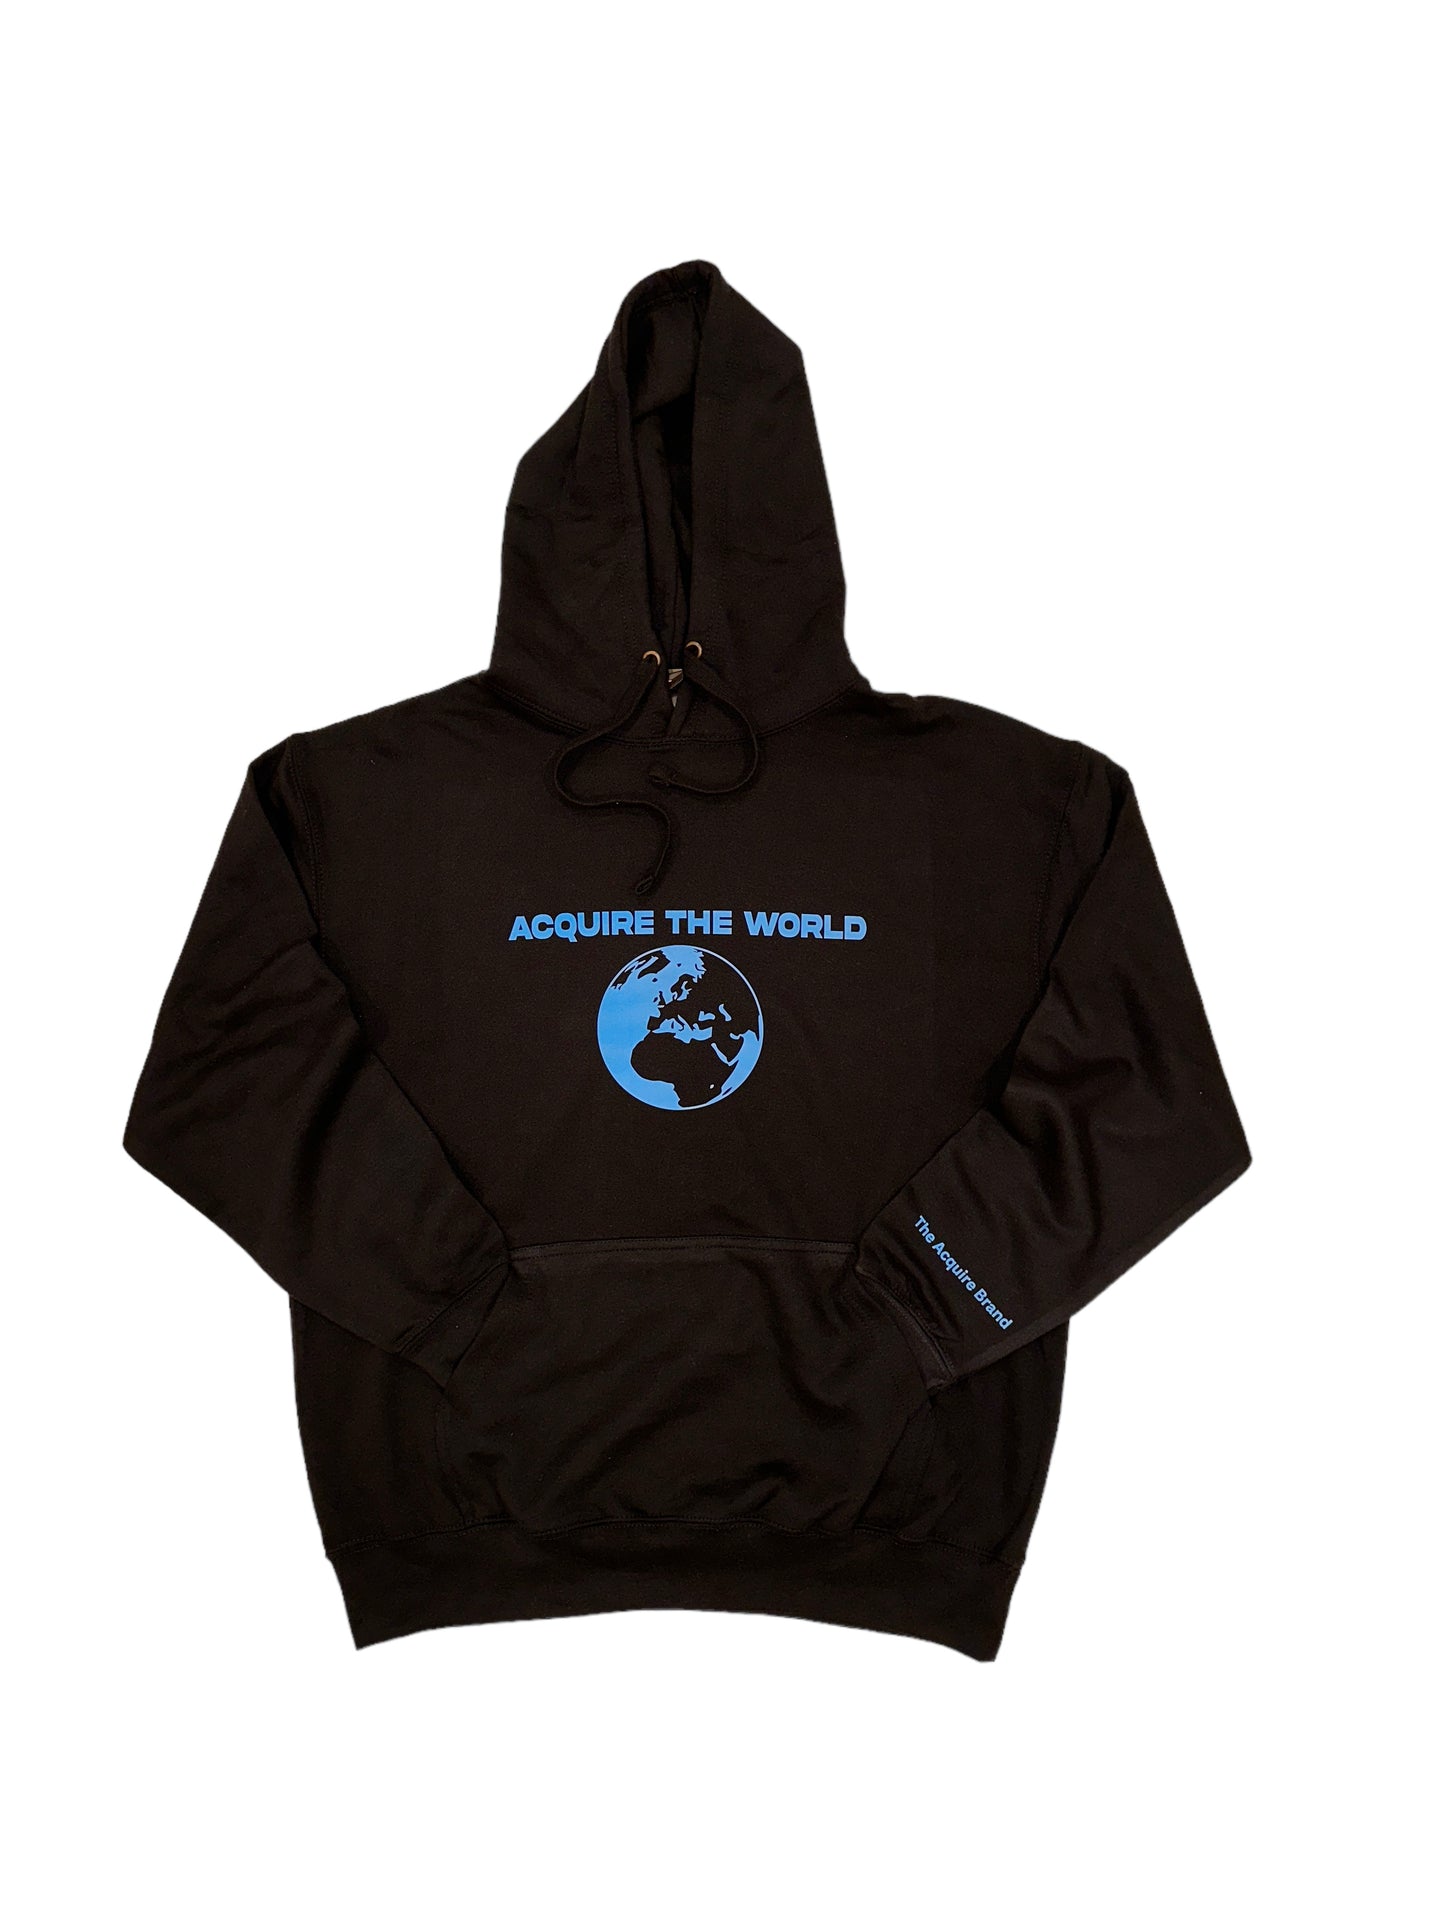 Classic Black Acquire The World Hoodies